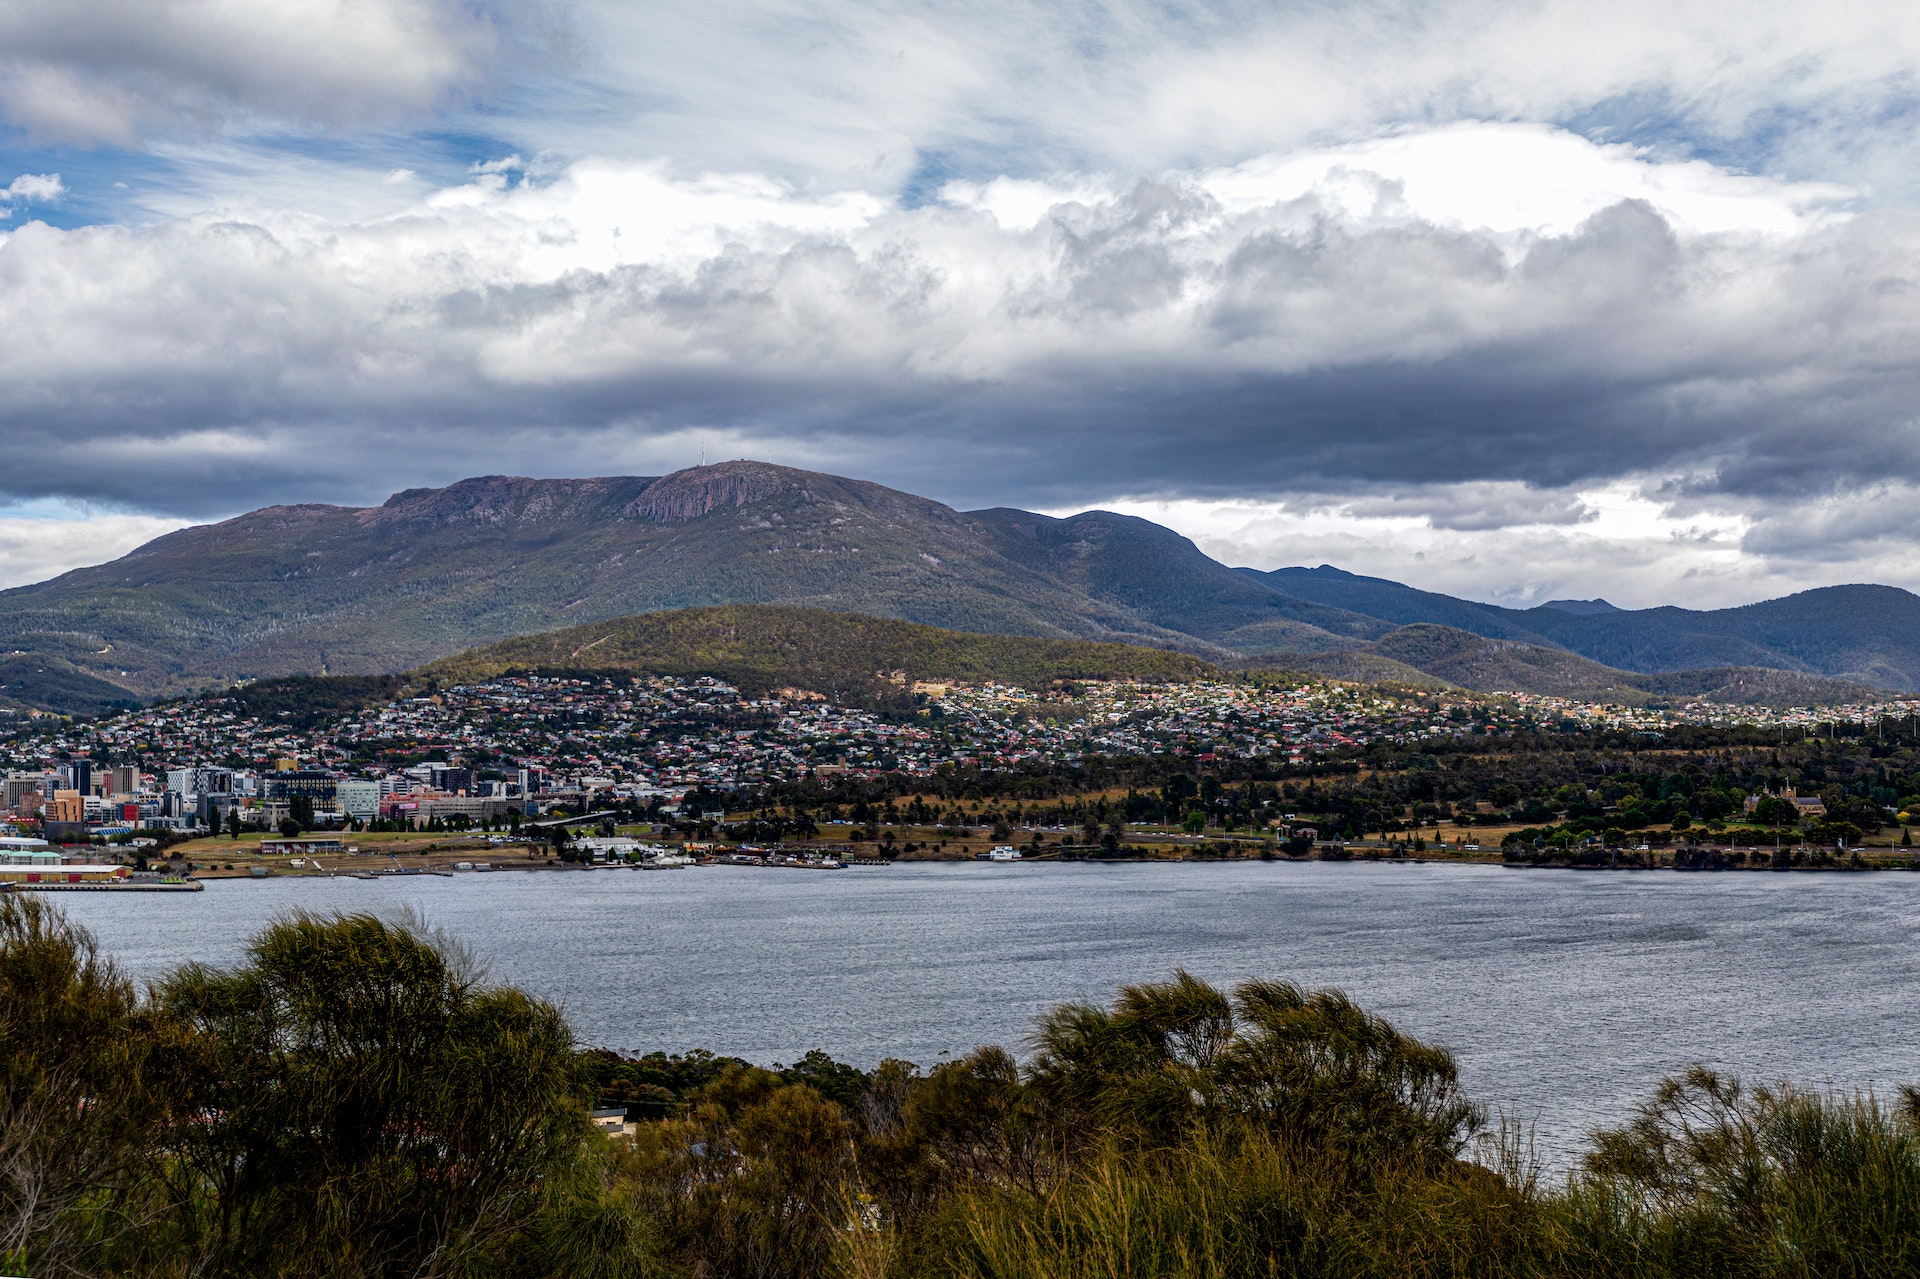 What is Hobart known for?